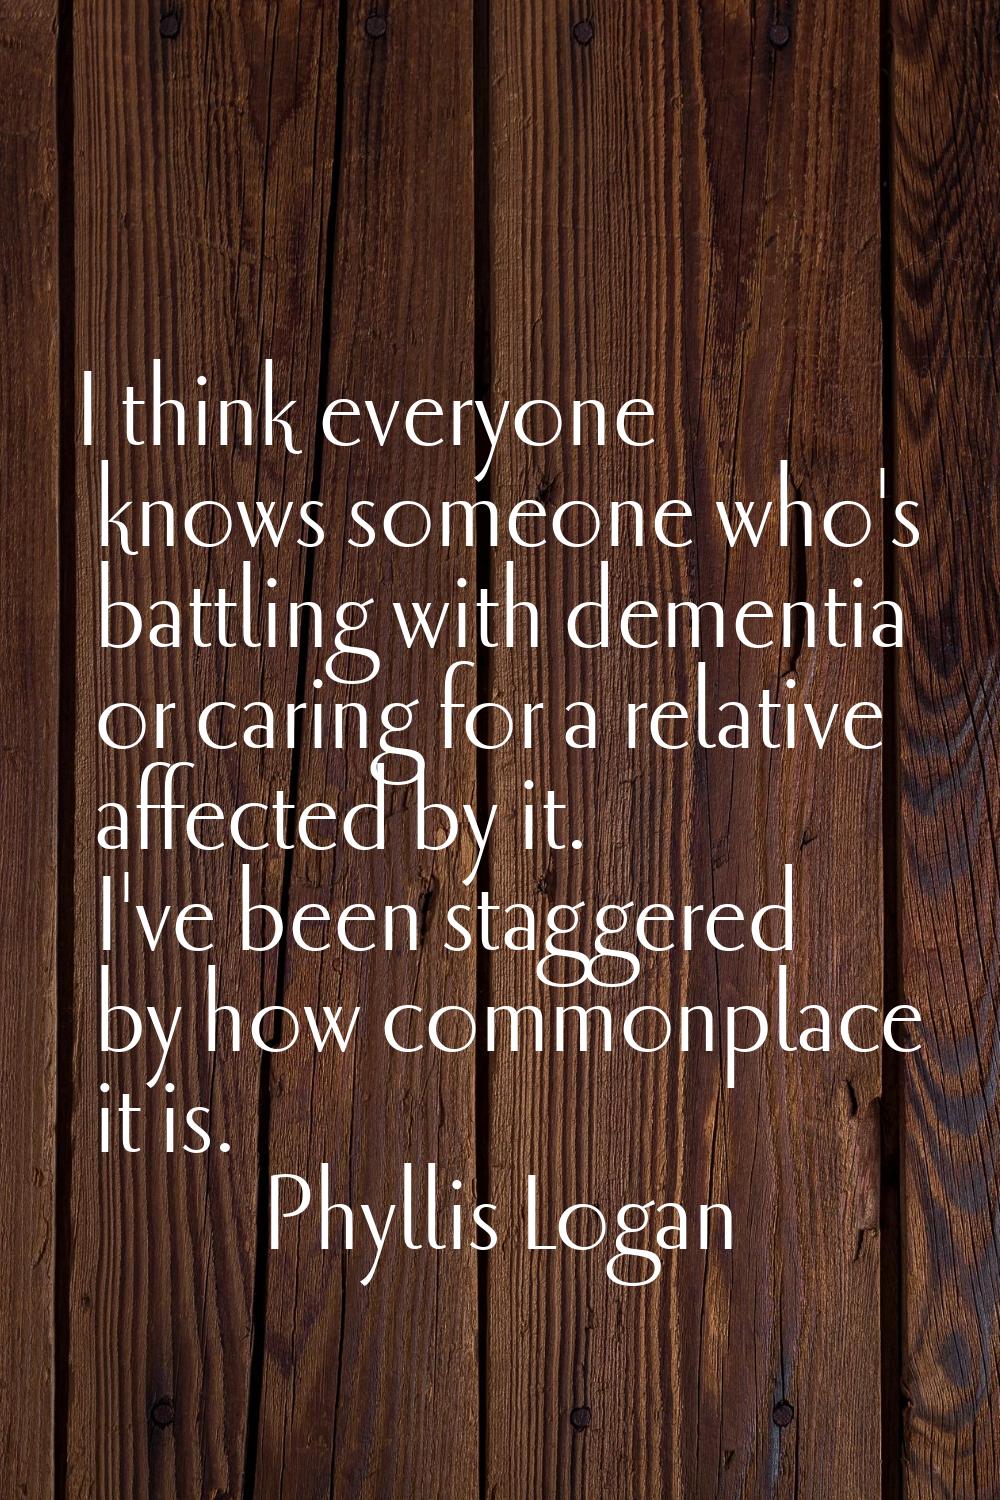 I think everyone knows someone who's battling with dementia or caring for a relative affected by it